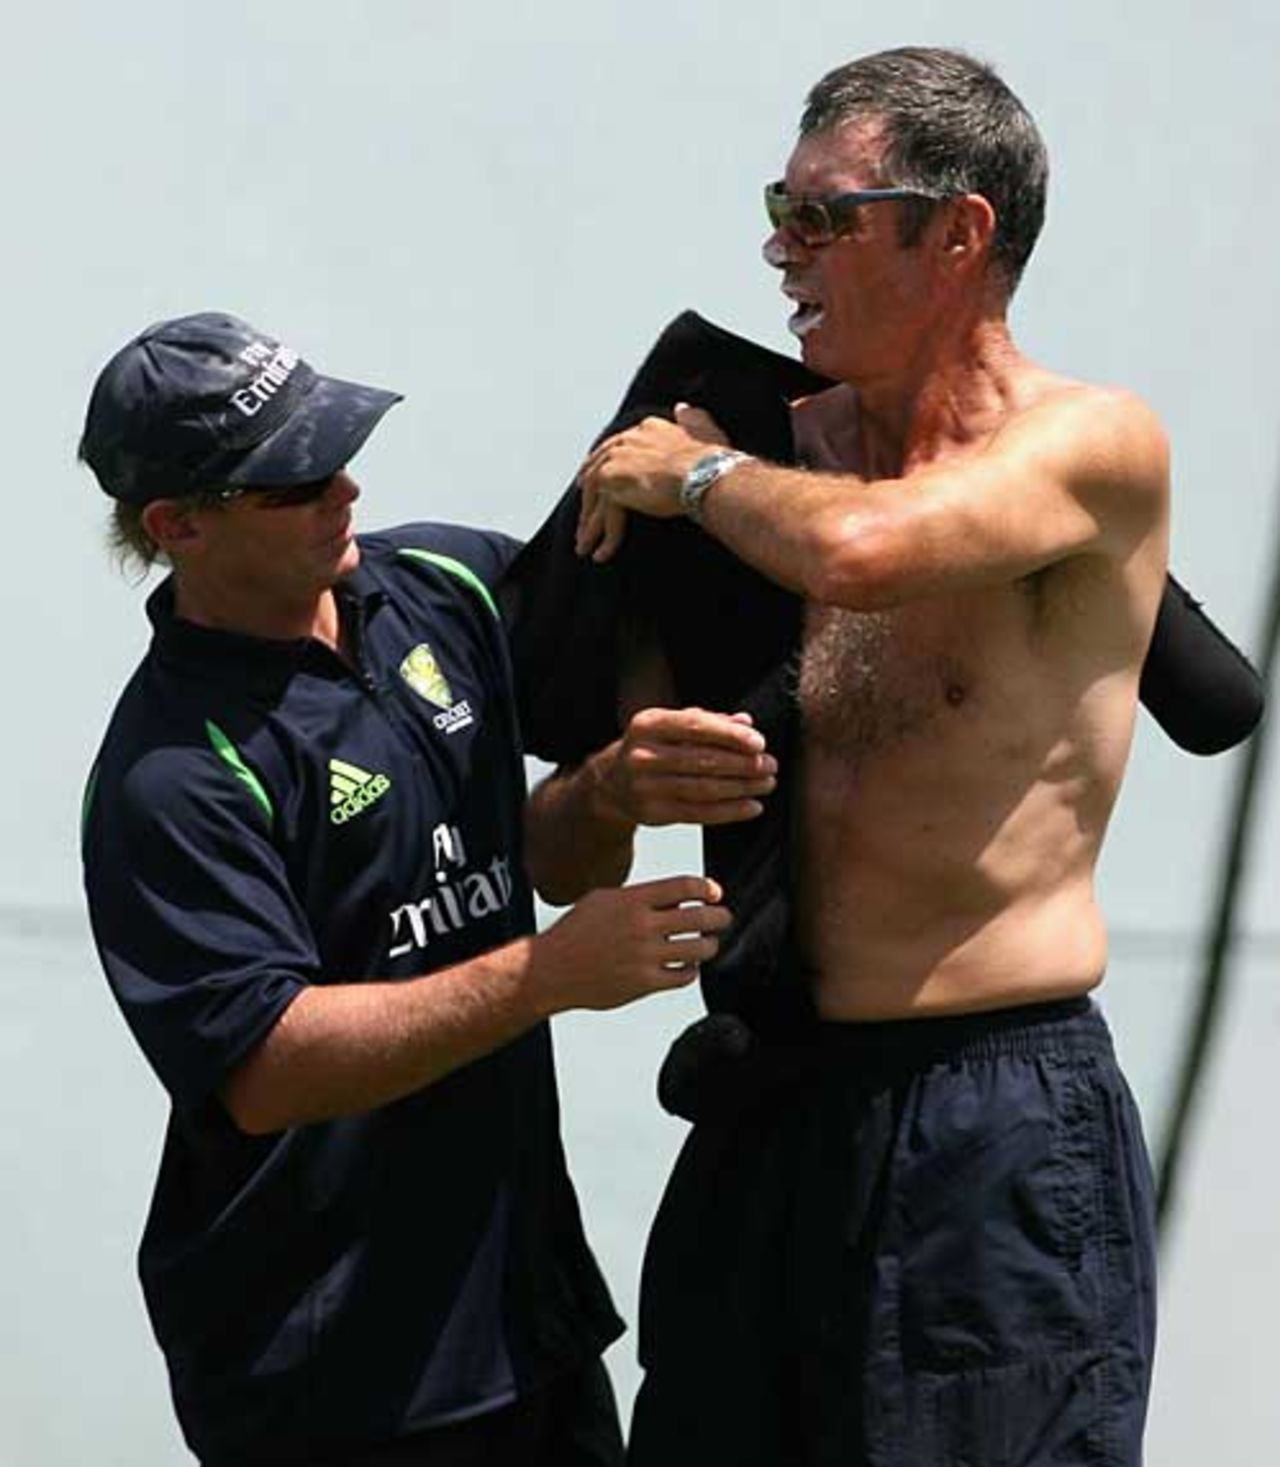 John Buchanan gets some treatment from the Aussie physio, Kensington Oval, Barbados, April 12, 2007